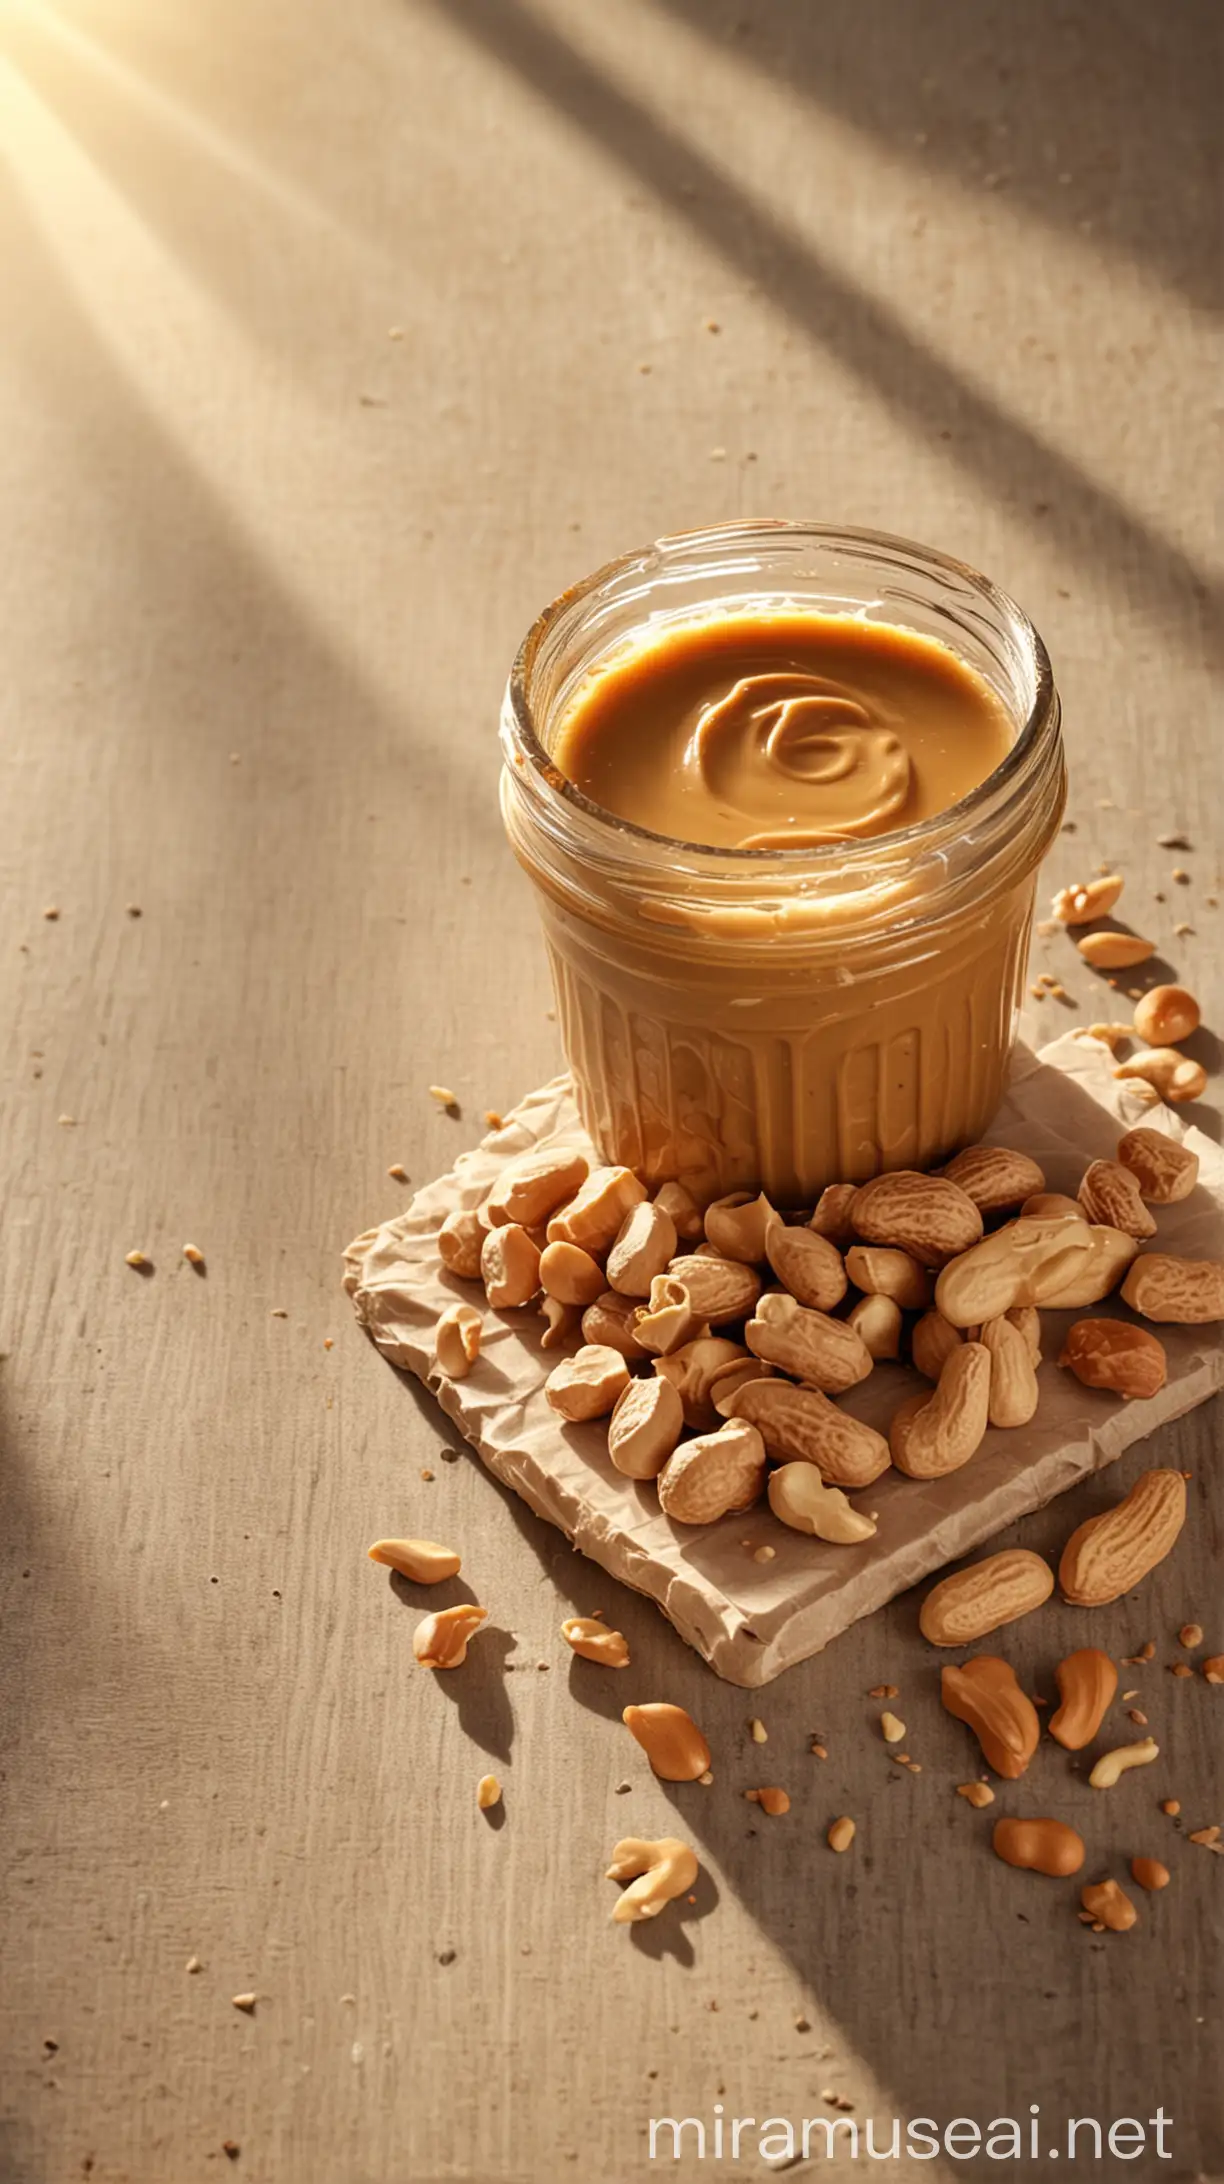 peanut butter on table, natural background, sun light effect, 4k, HDR, morning time weather